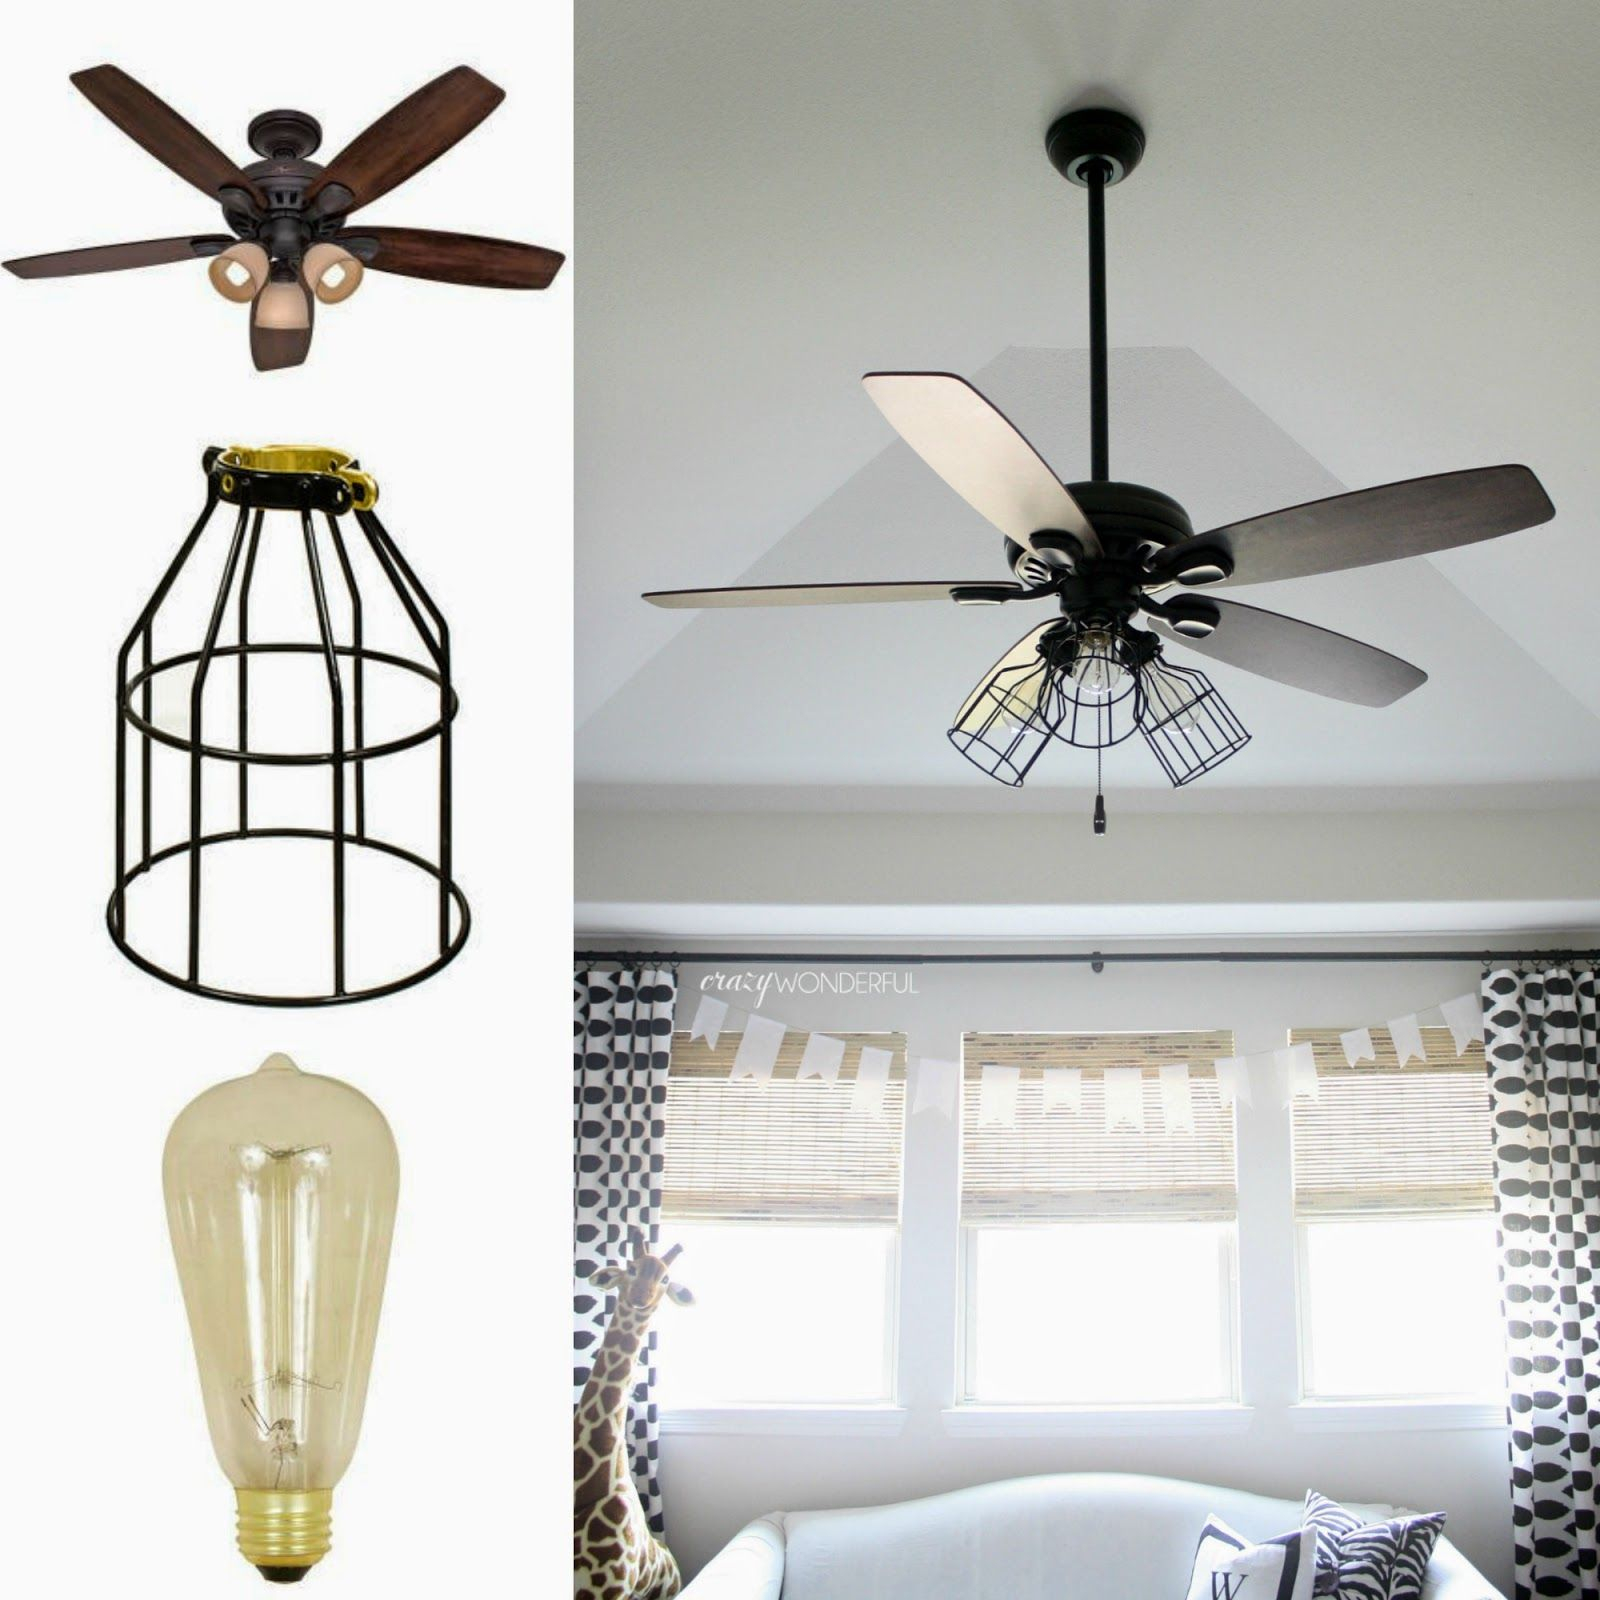 Diy Cage Light Ceiling Fan Ceiling Fan Light Cover Diy within sizing 1600 X 1600